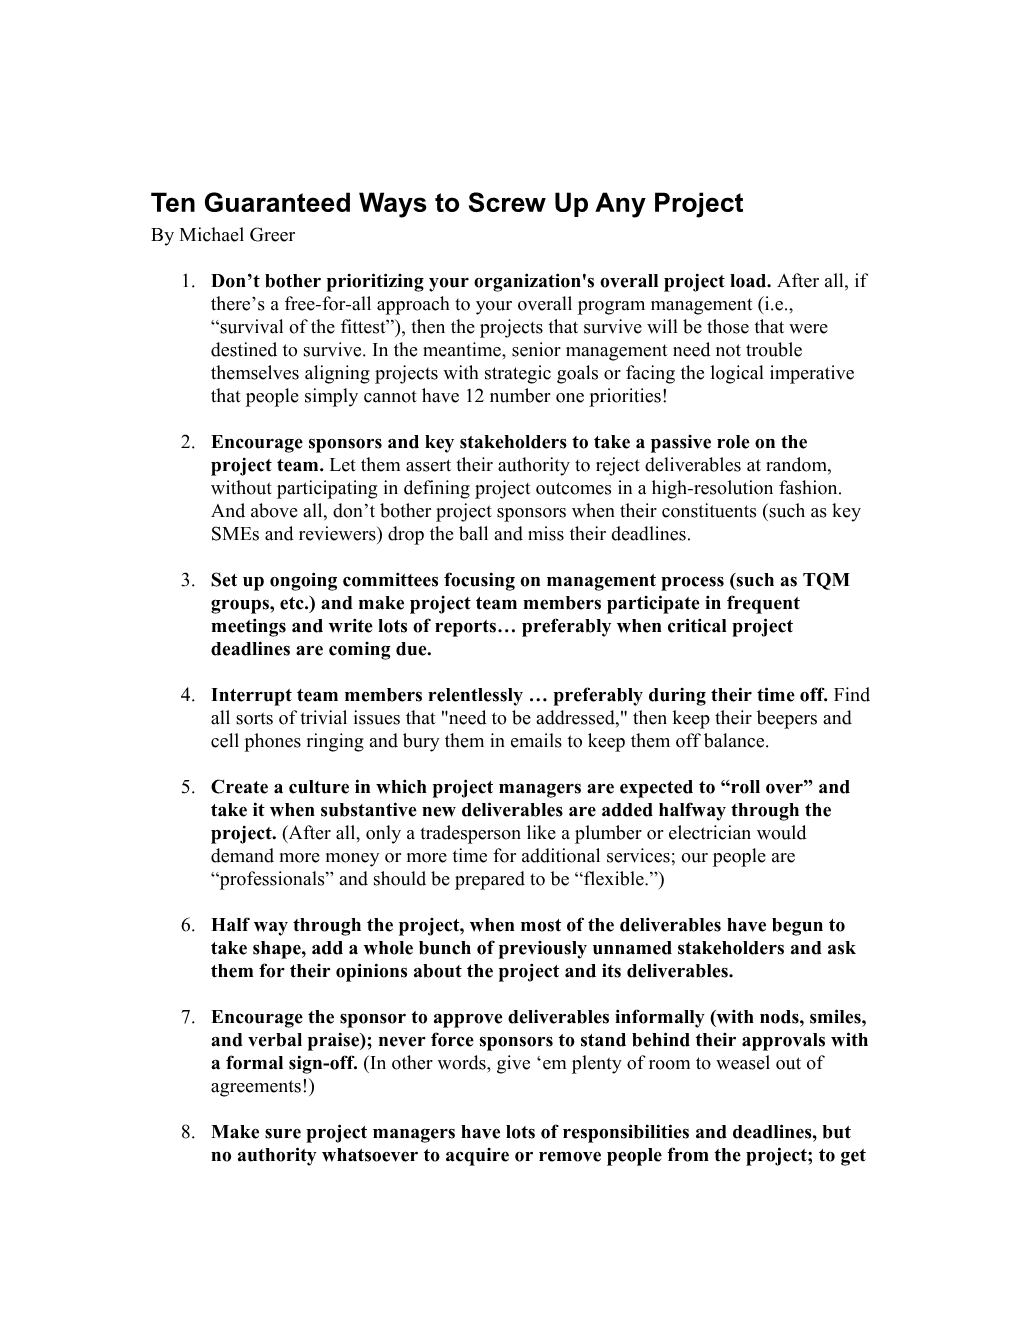 Ten Guaranteed Ways to Screw up Any Project